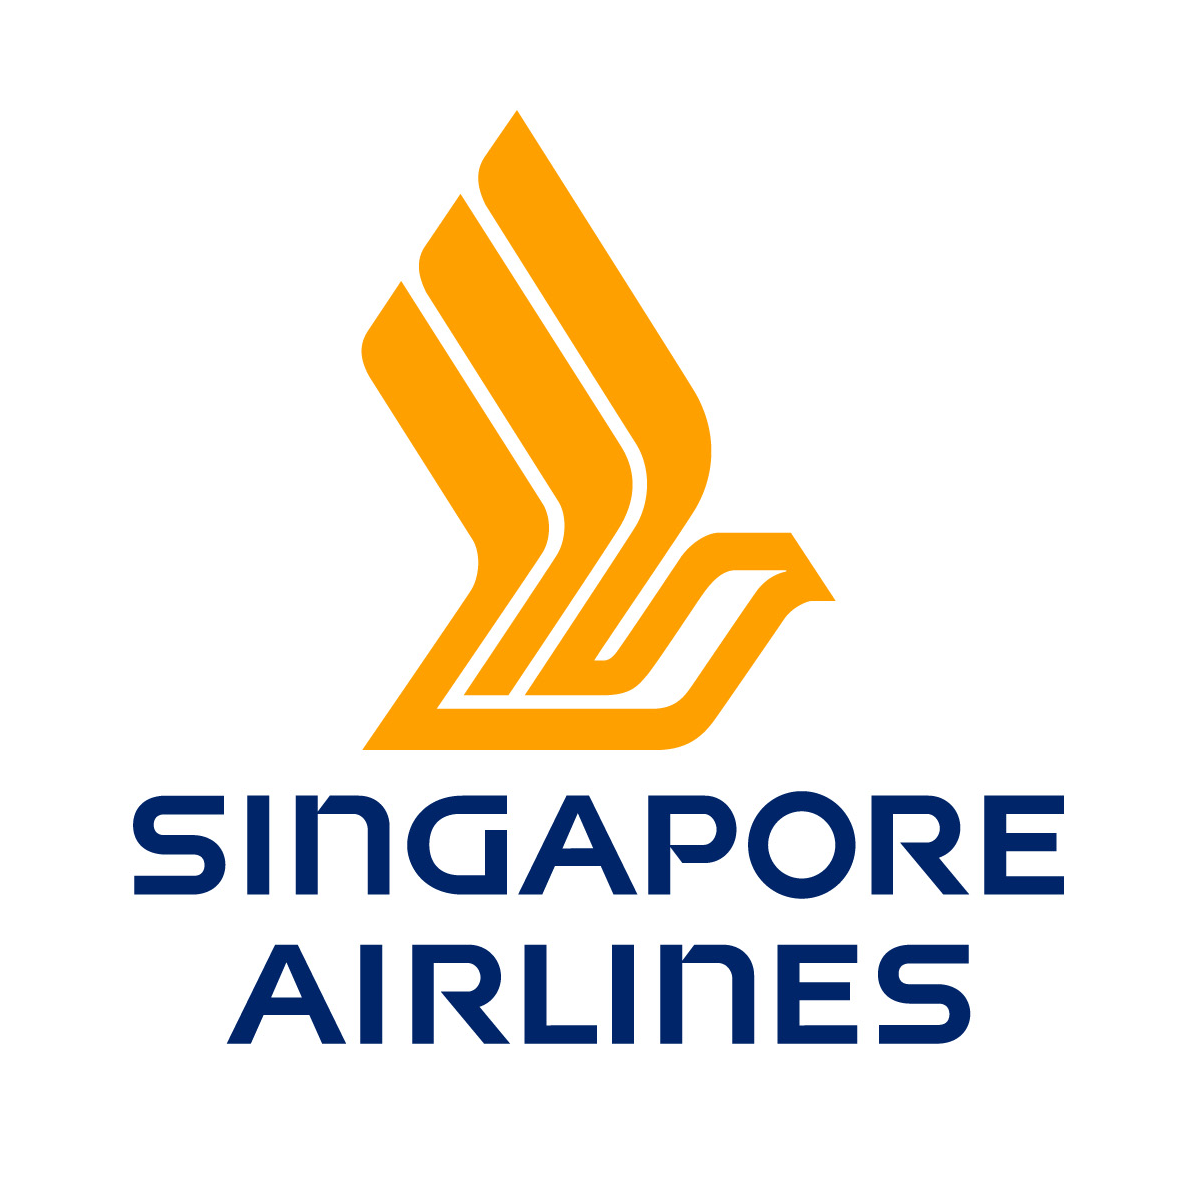 Singapore Airlines (SIA) vect